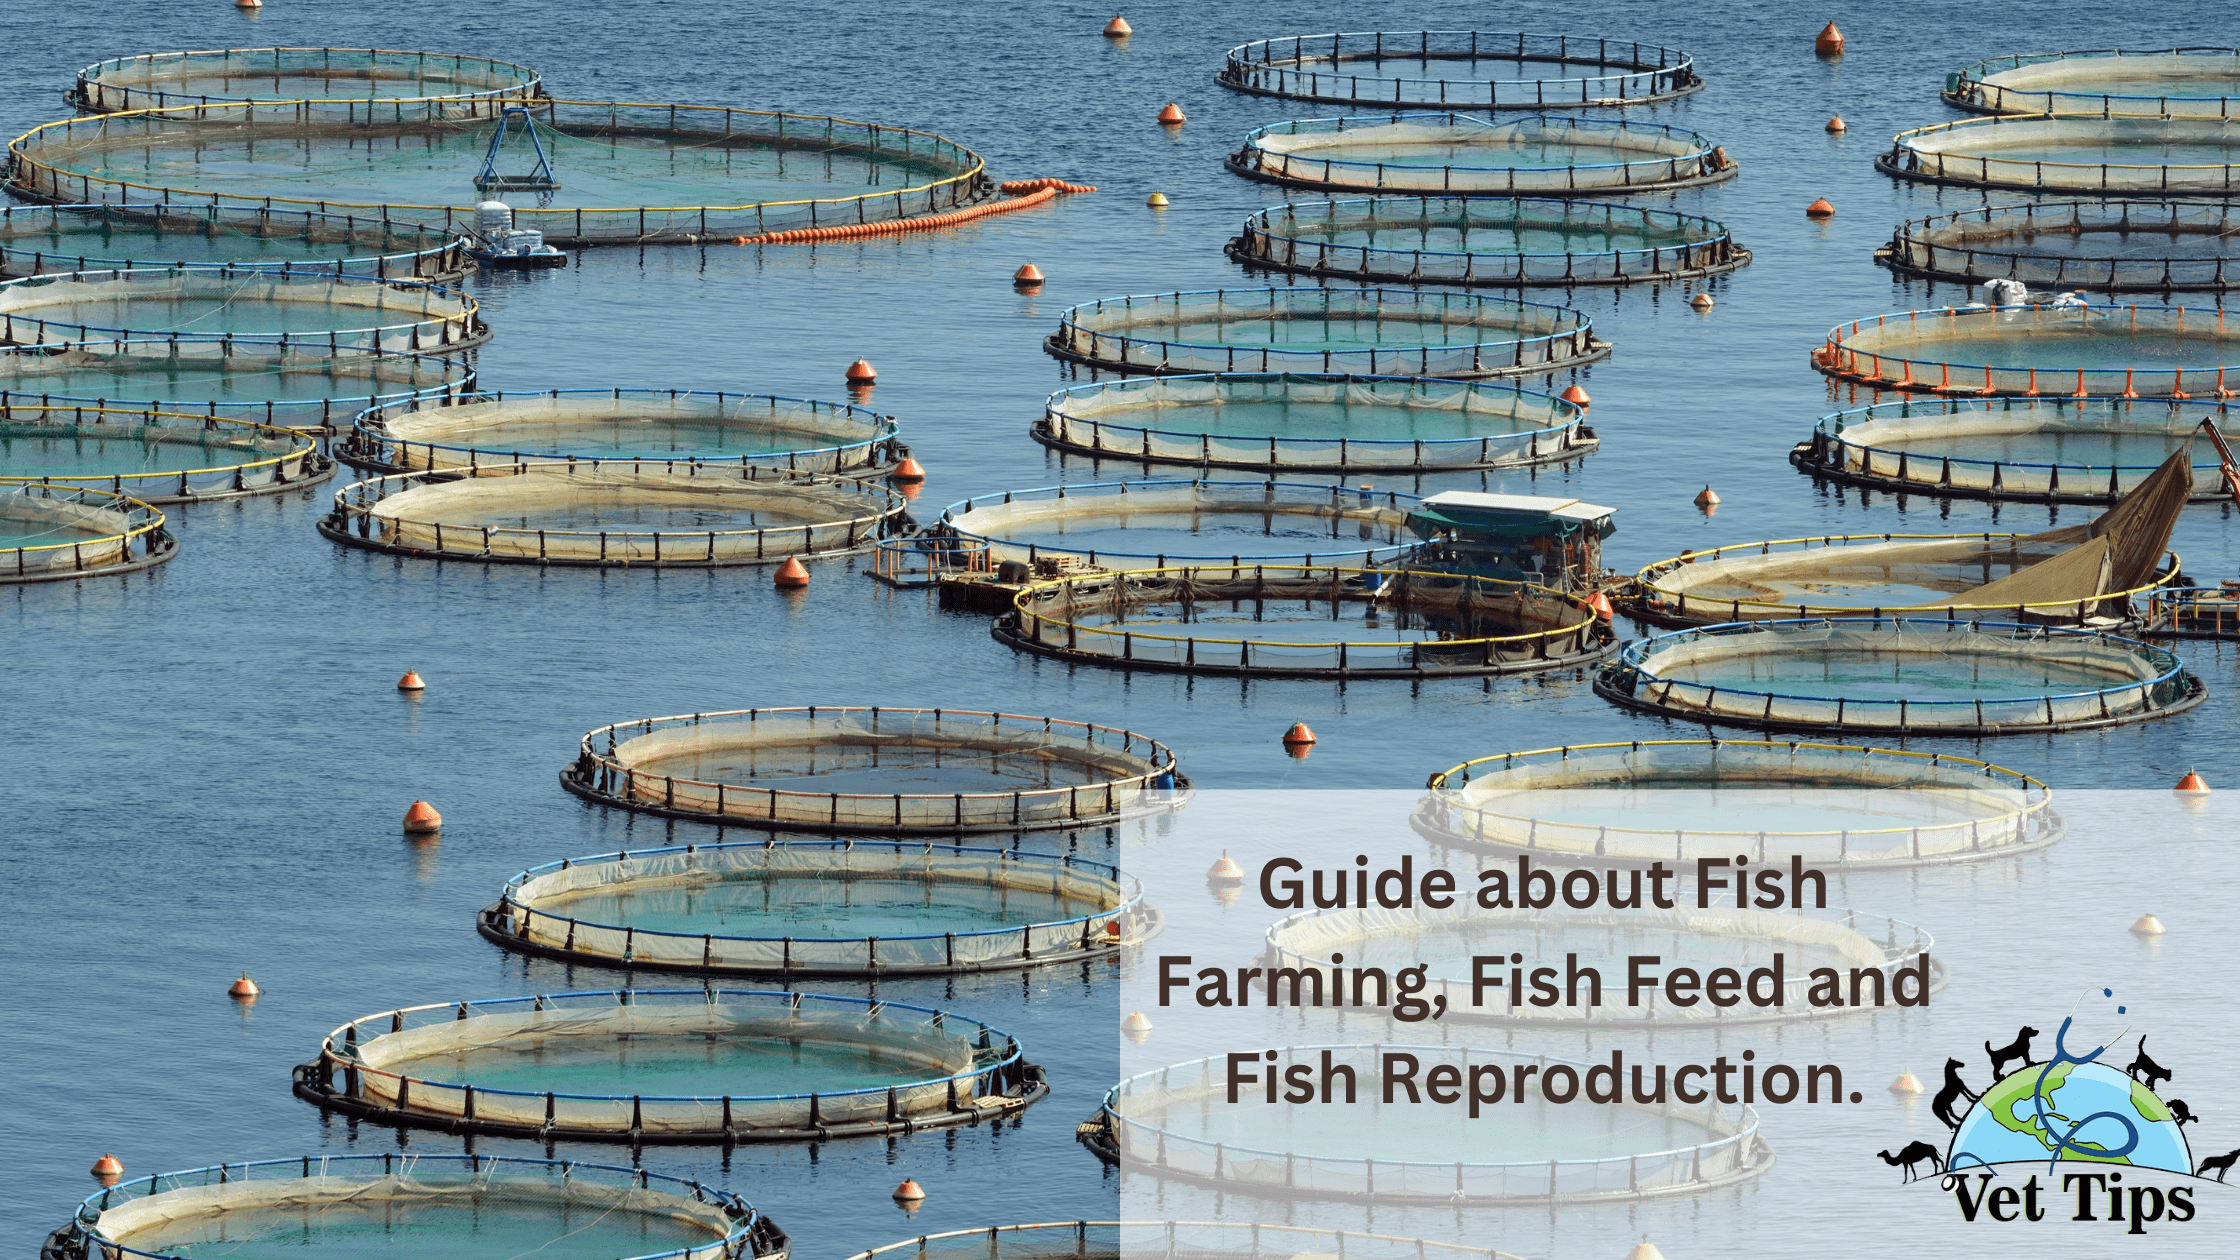 Guide about Fish Farming, Fish Feed and Fish Reproduction